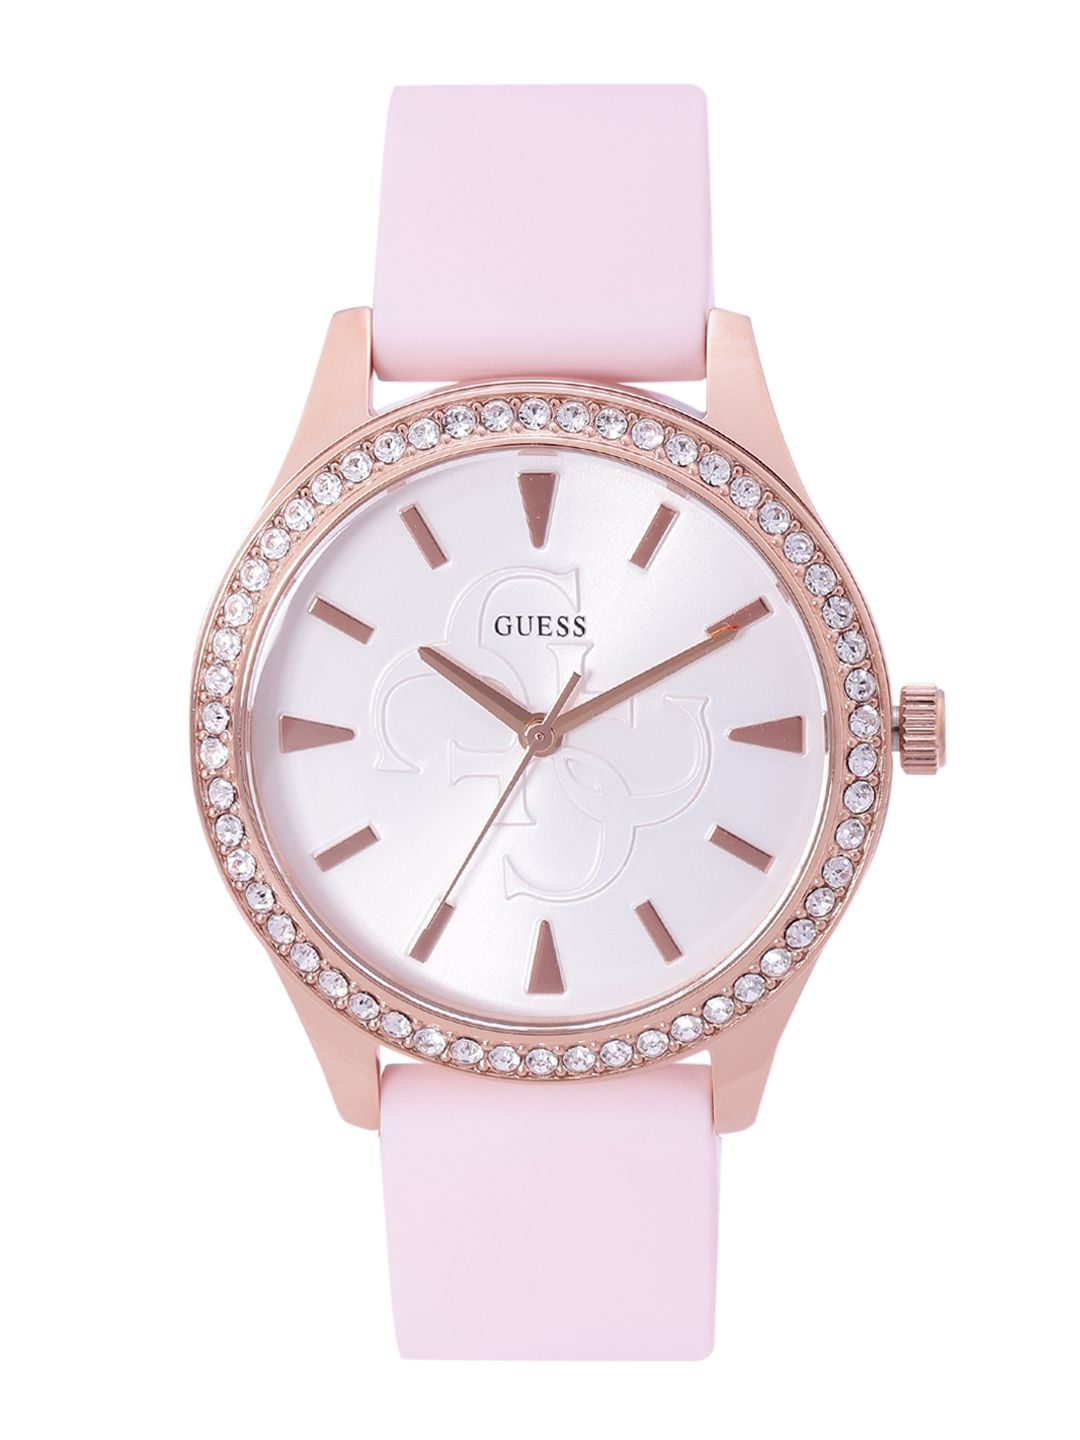 GUESS Women Off- White Patterned Dial & Pink Straps Analogue Watch GW0359L3 Price in India